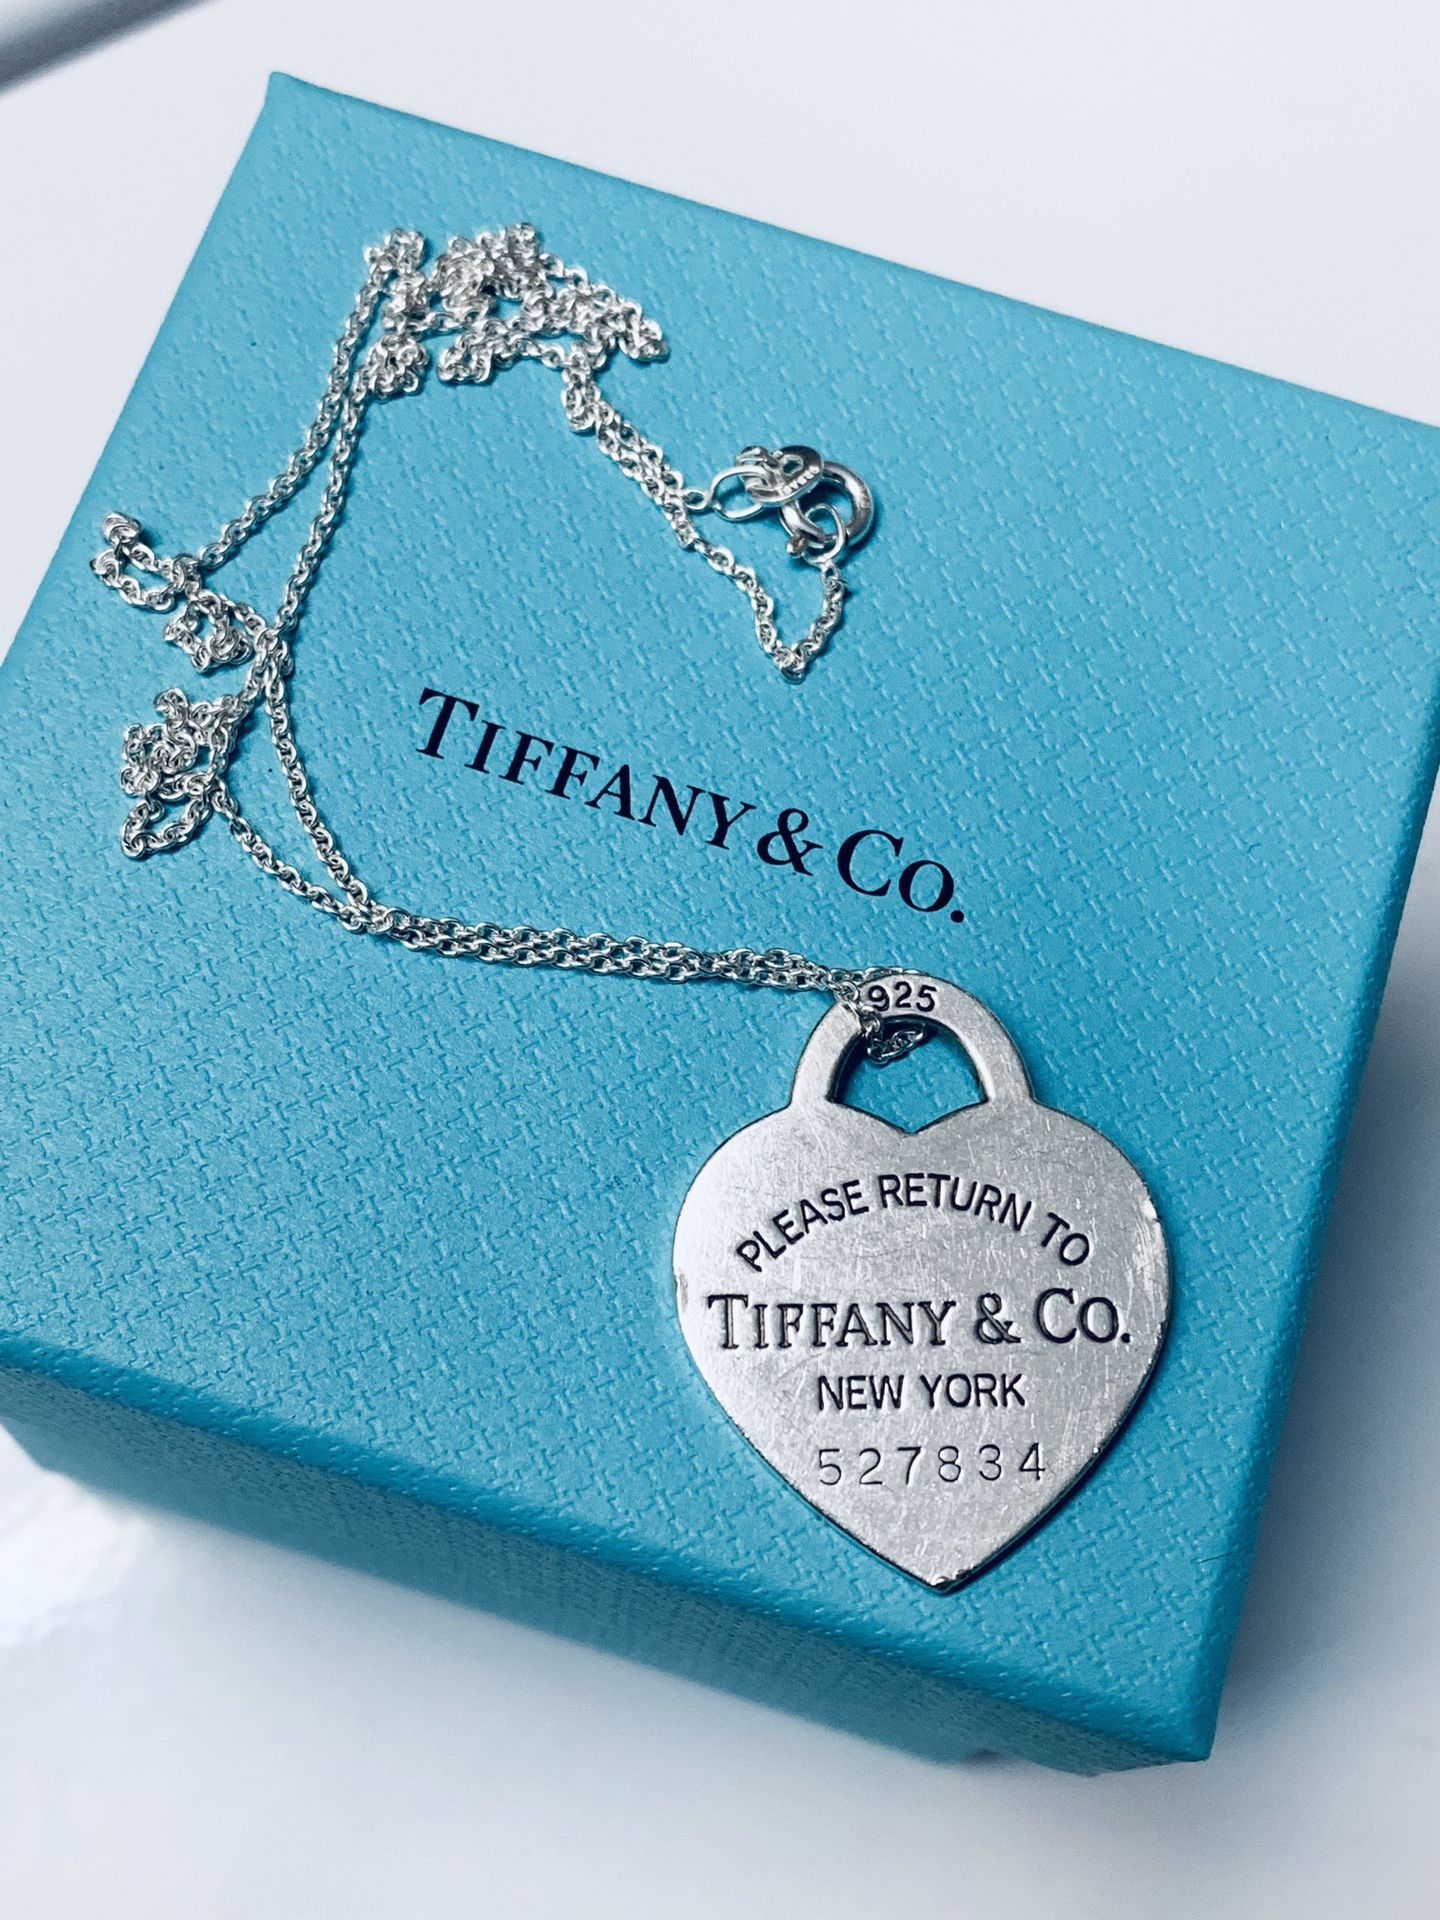 Tiffany & Co. Sterling Silver Large Heart 925 Tag Charm Necklace Pendant